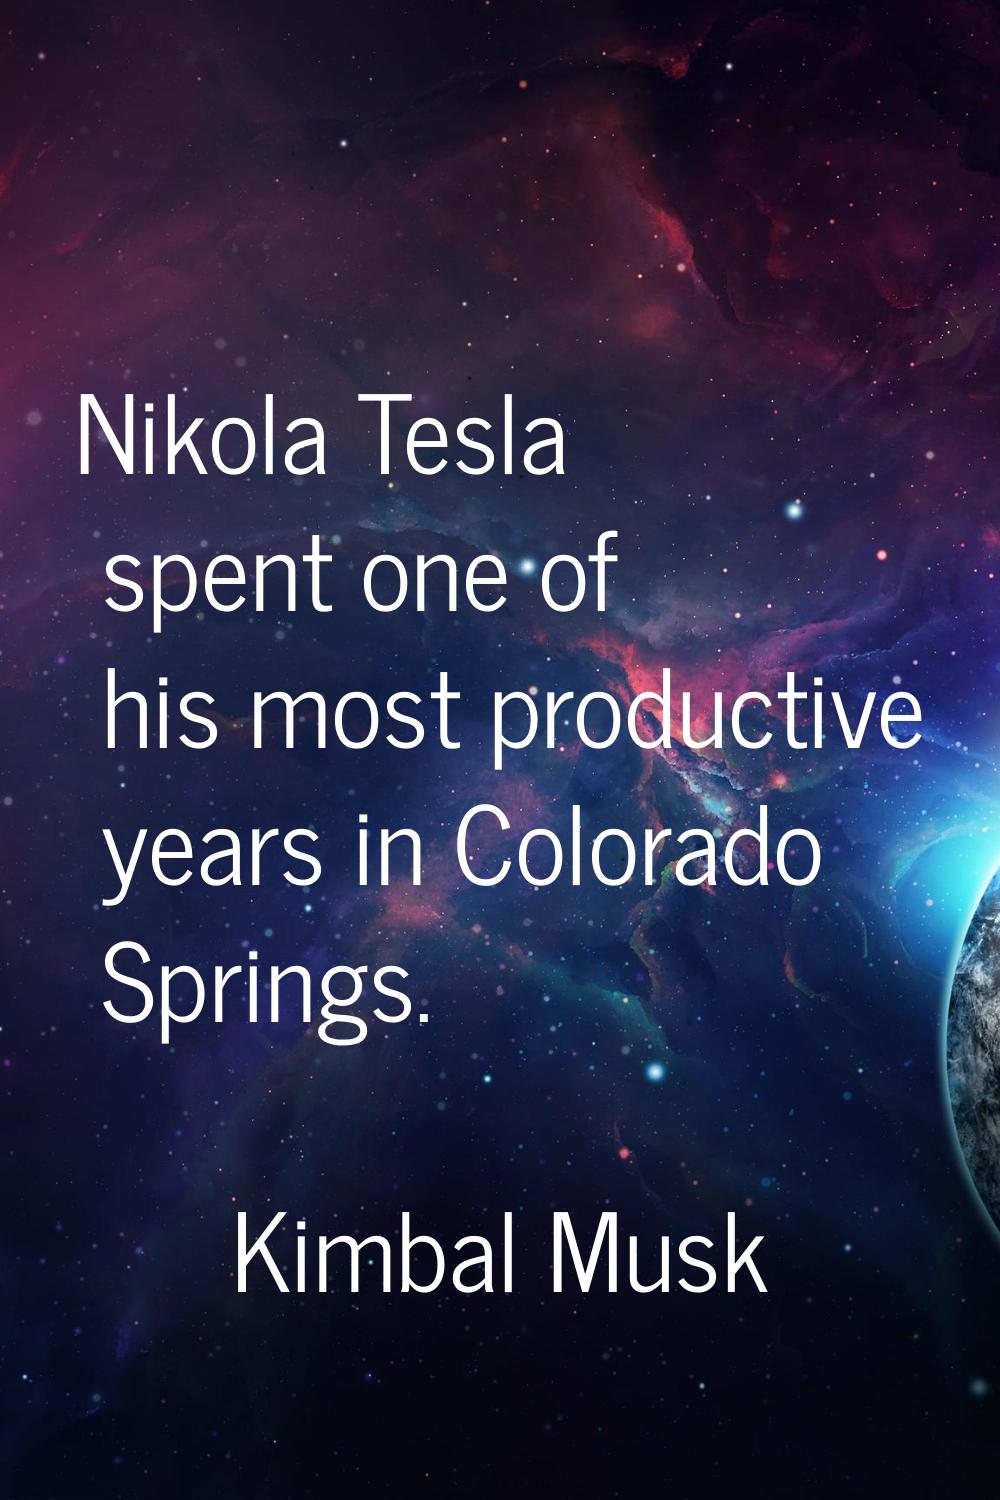 Nikola Tesla spent one of his most productive years in Colorado Springs.